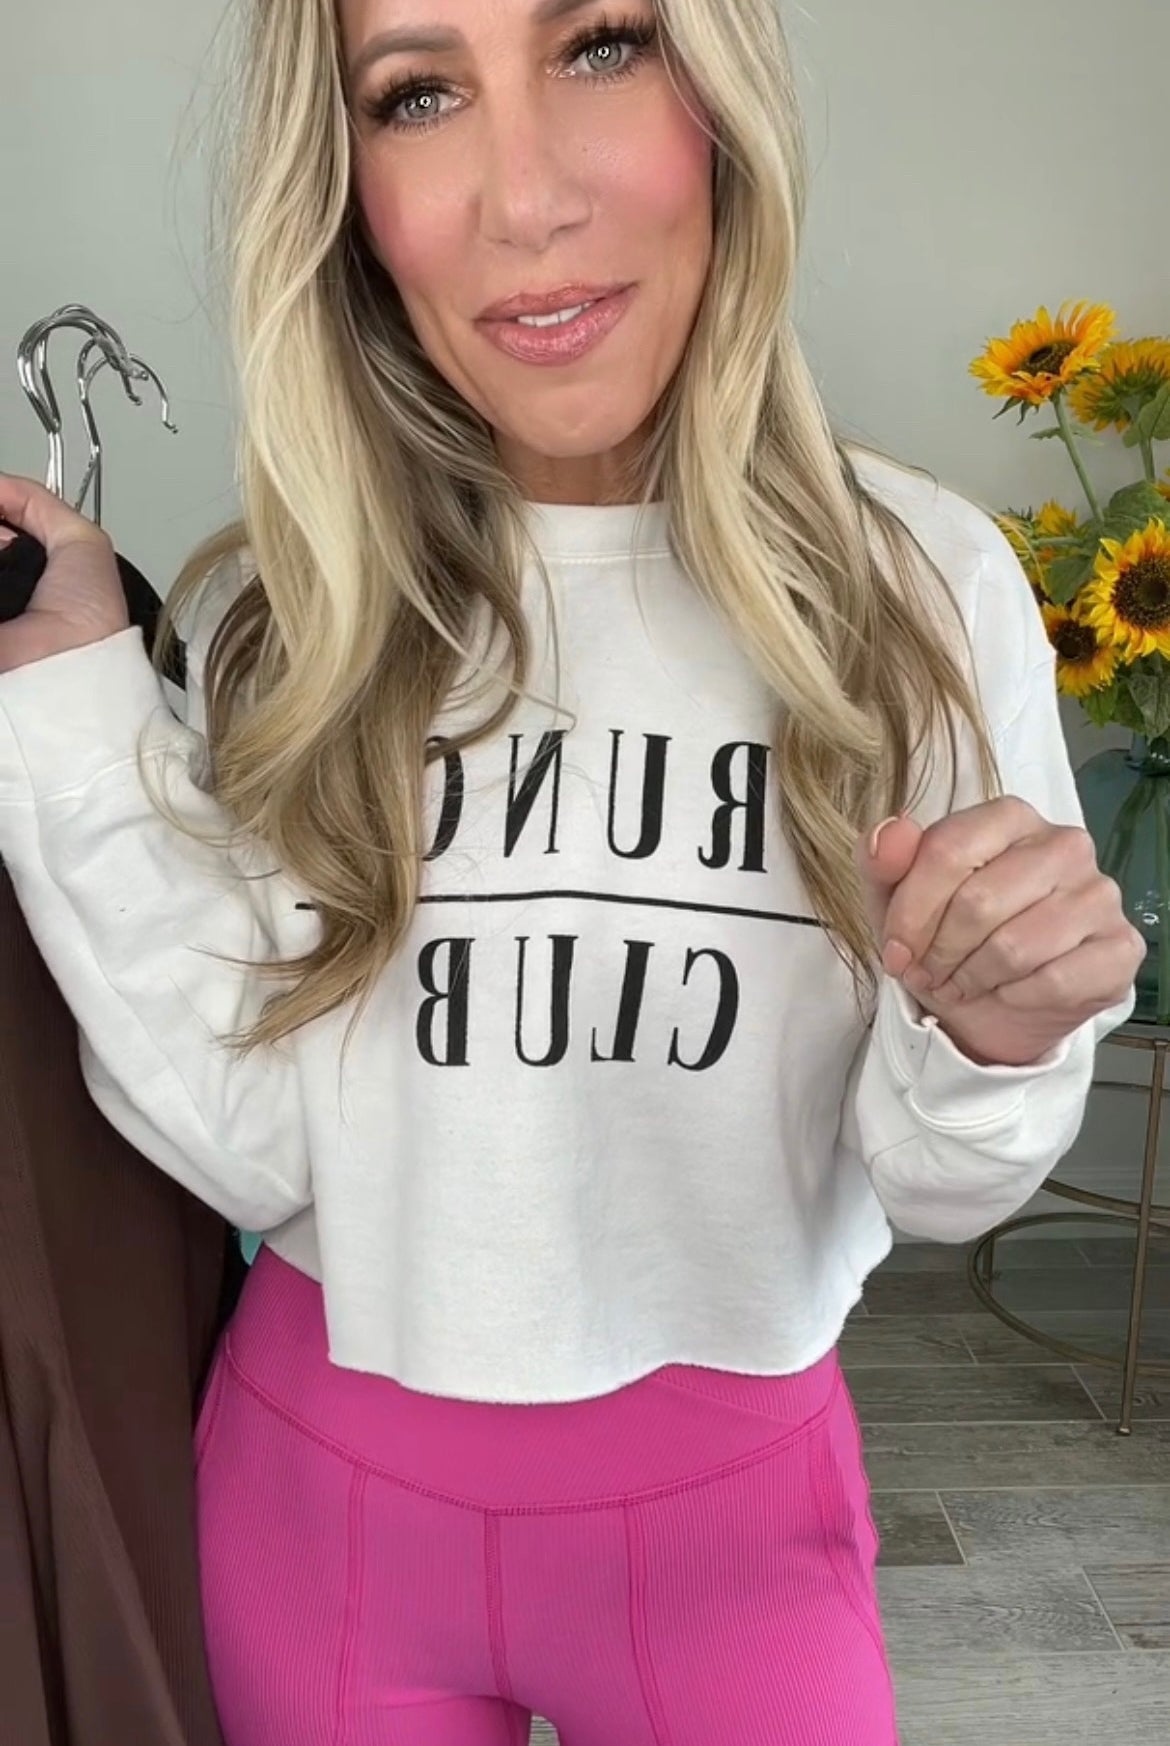 Brunch Club Sweatshirt-140 Graphic Tees- Simply Simpson's Boutique is a Women's Online Fashion Boutique Located in Jupiter, Florida